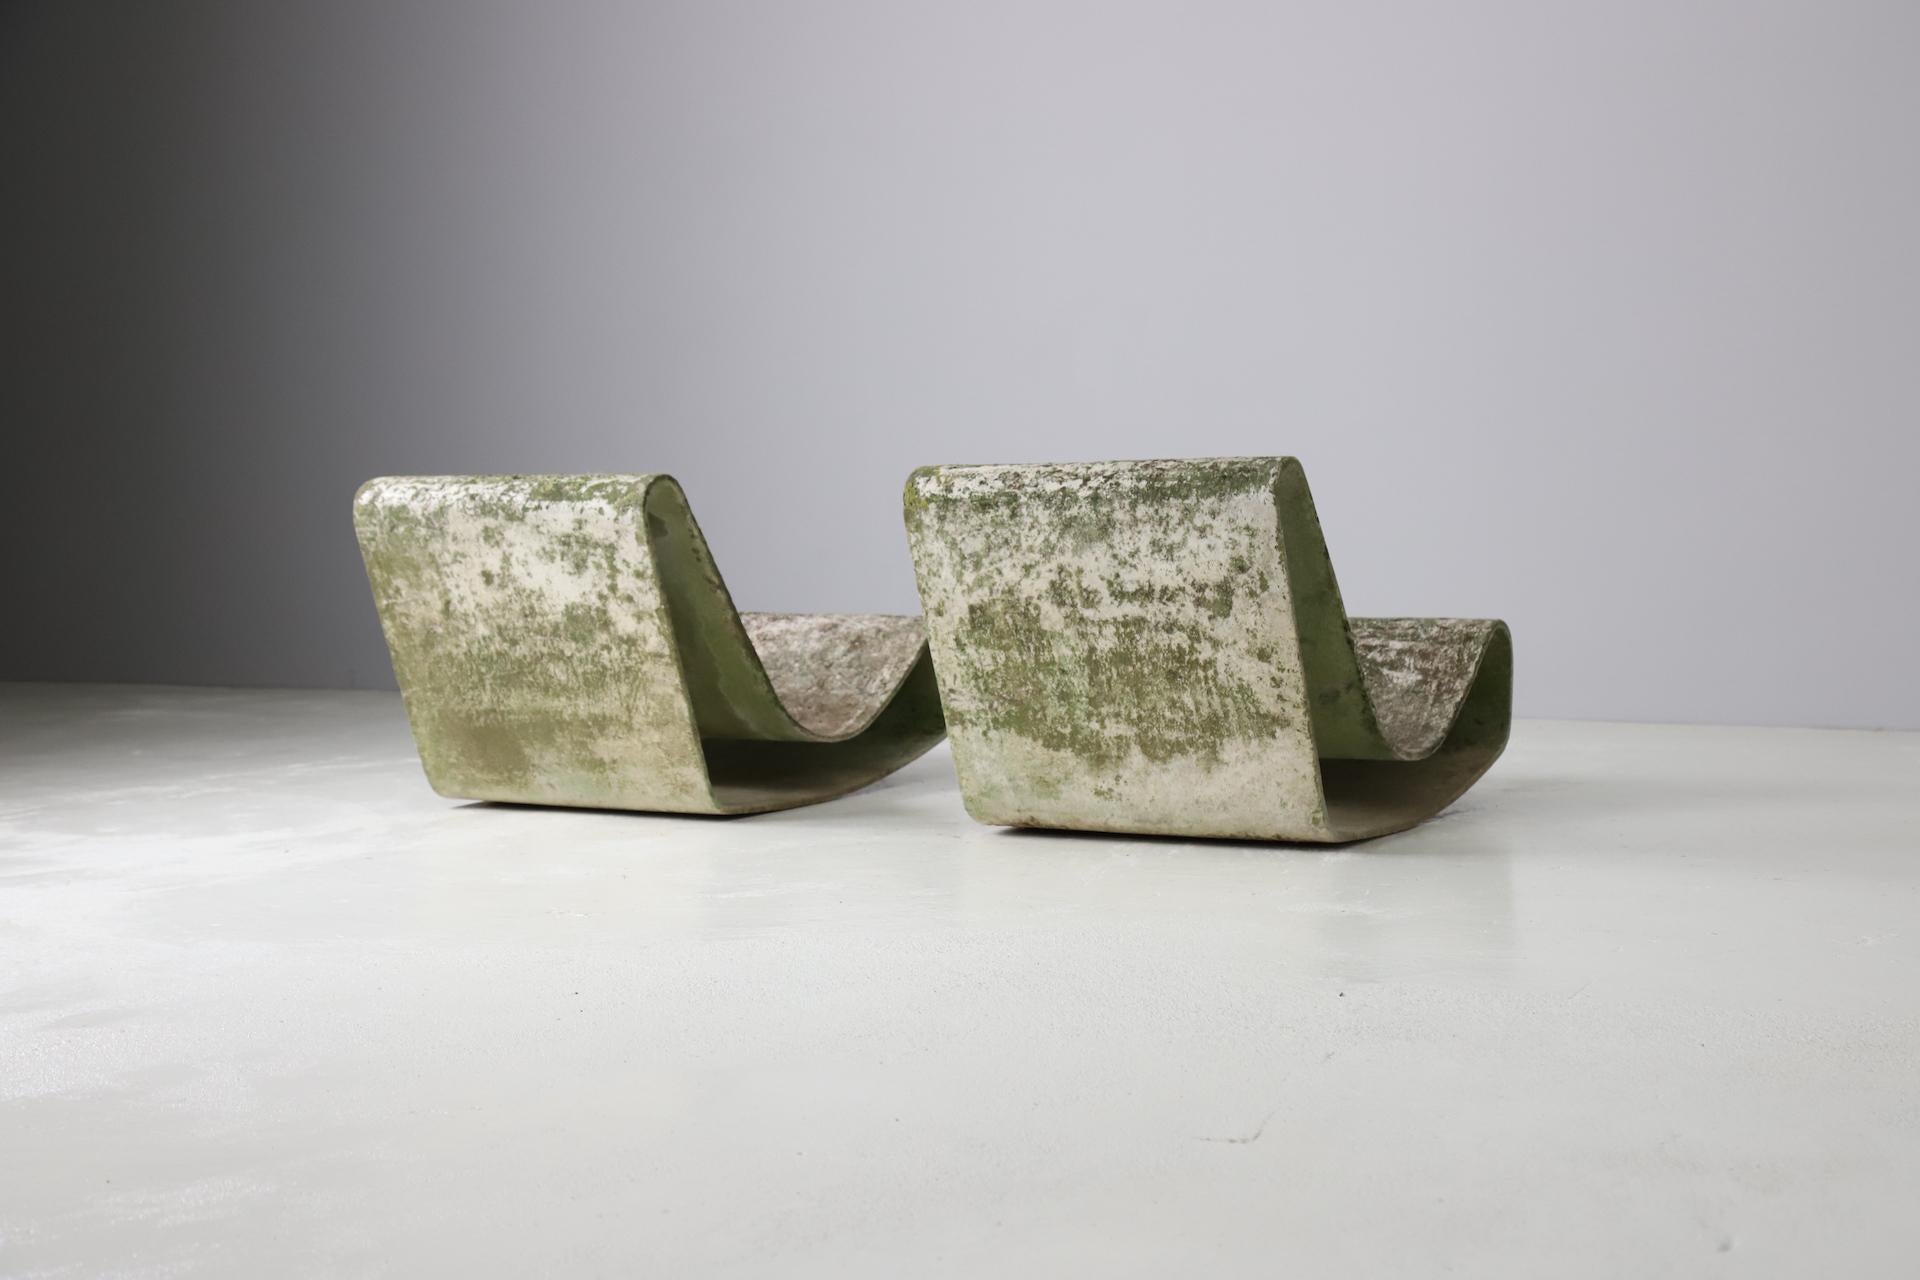 Very decorative pair of 'loop' chairs designed by Willy Guhl, 1954 Switzerland. These iconic loop garden chairs are one of the early productions, made in Switzerland. Made out of a continues sheet of reinforced concrete. Over the year the chairs